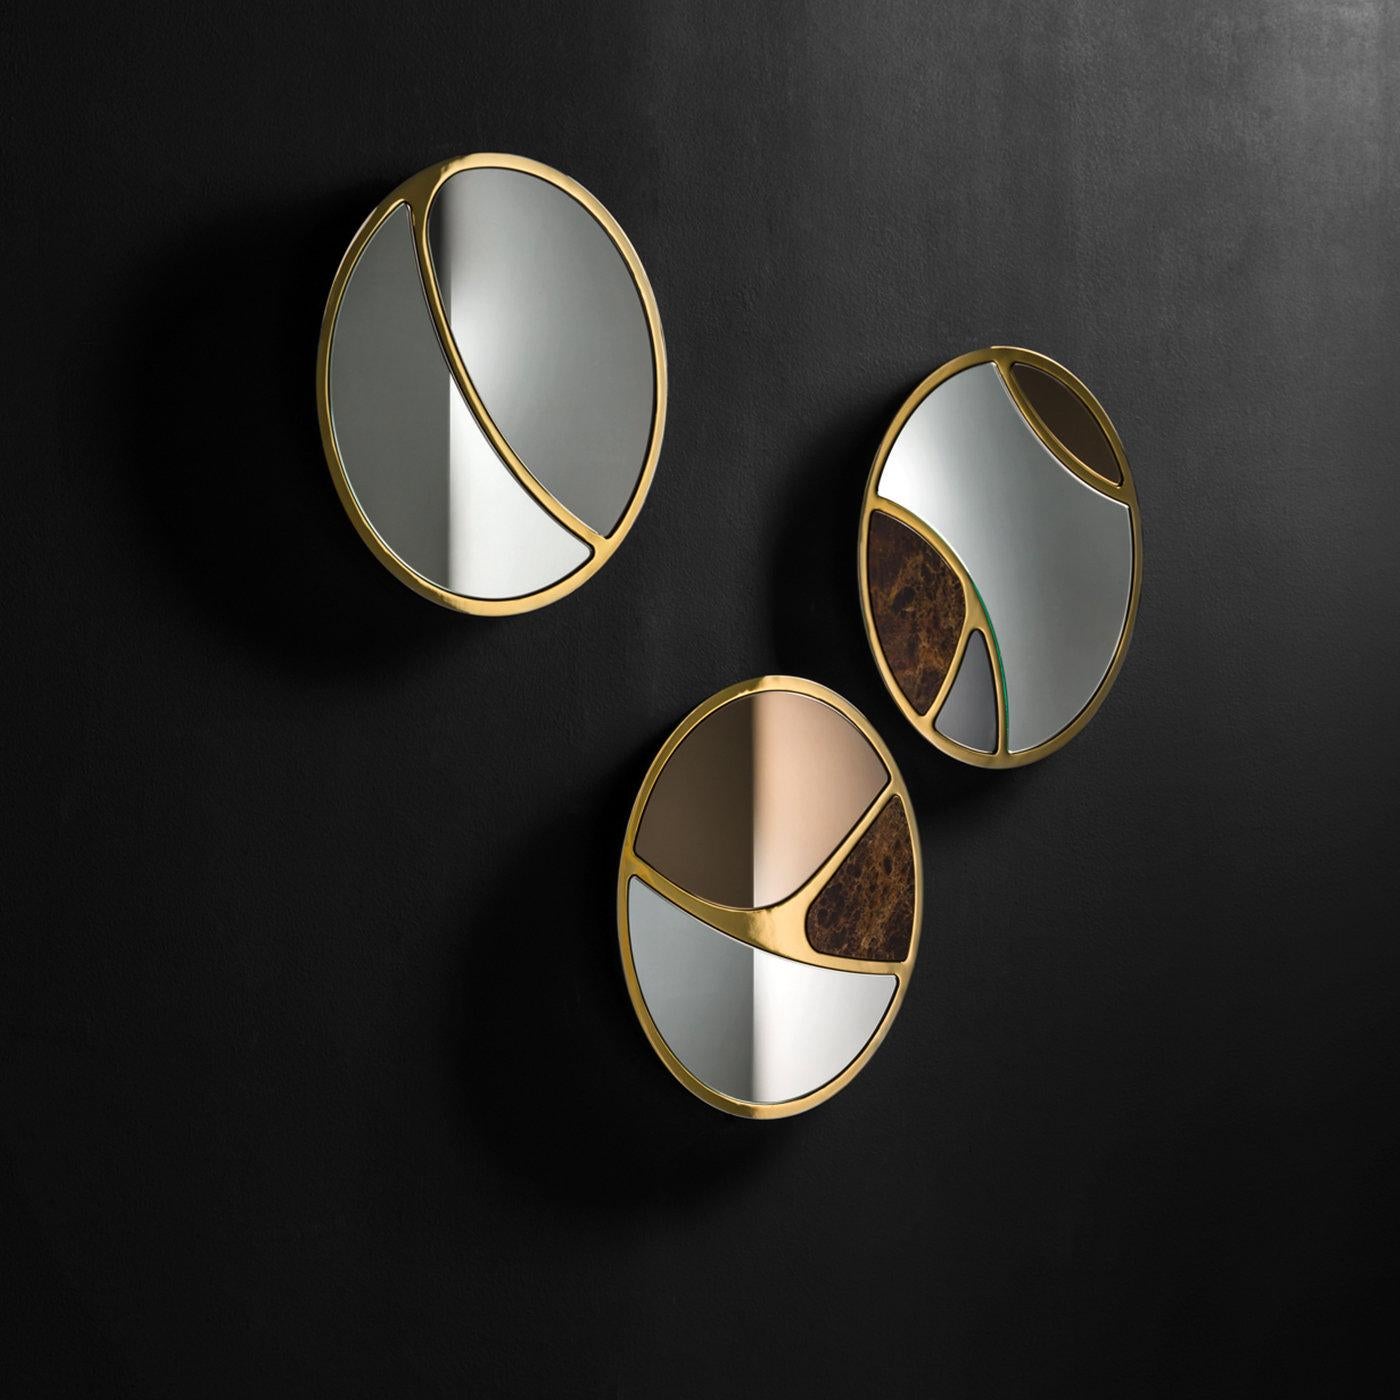 This mirror is decorative and functional, boasting a unique design, example of skillful craftsmanship. Divided by a laser-cut metal frame with a gold finish into two sections (smokey gray and clear), this refined piece is built on a structure